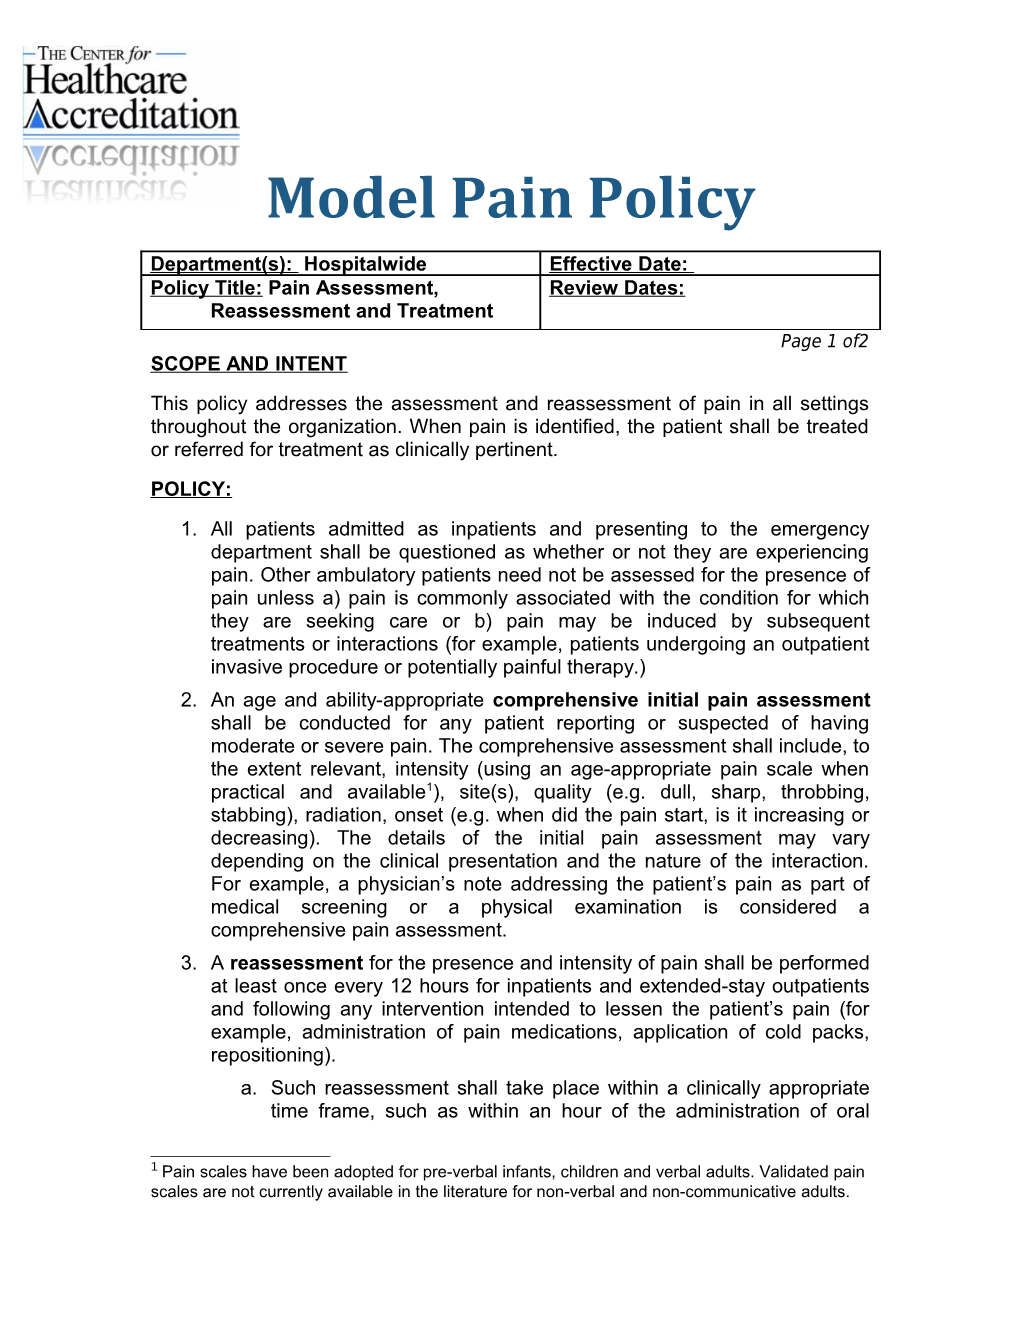 Model Pain Policy